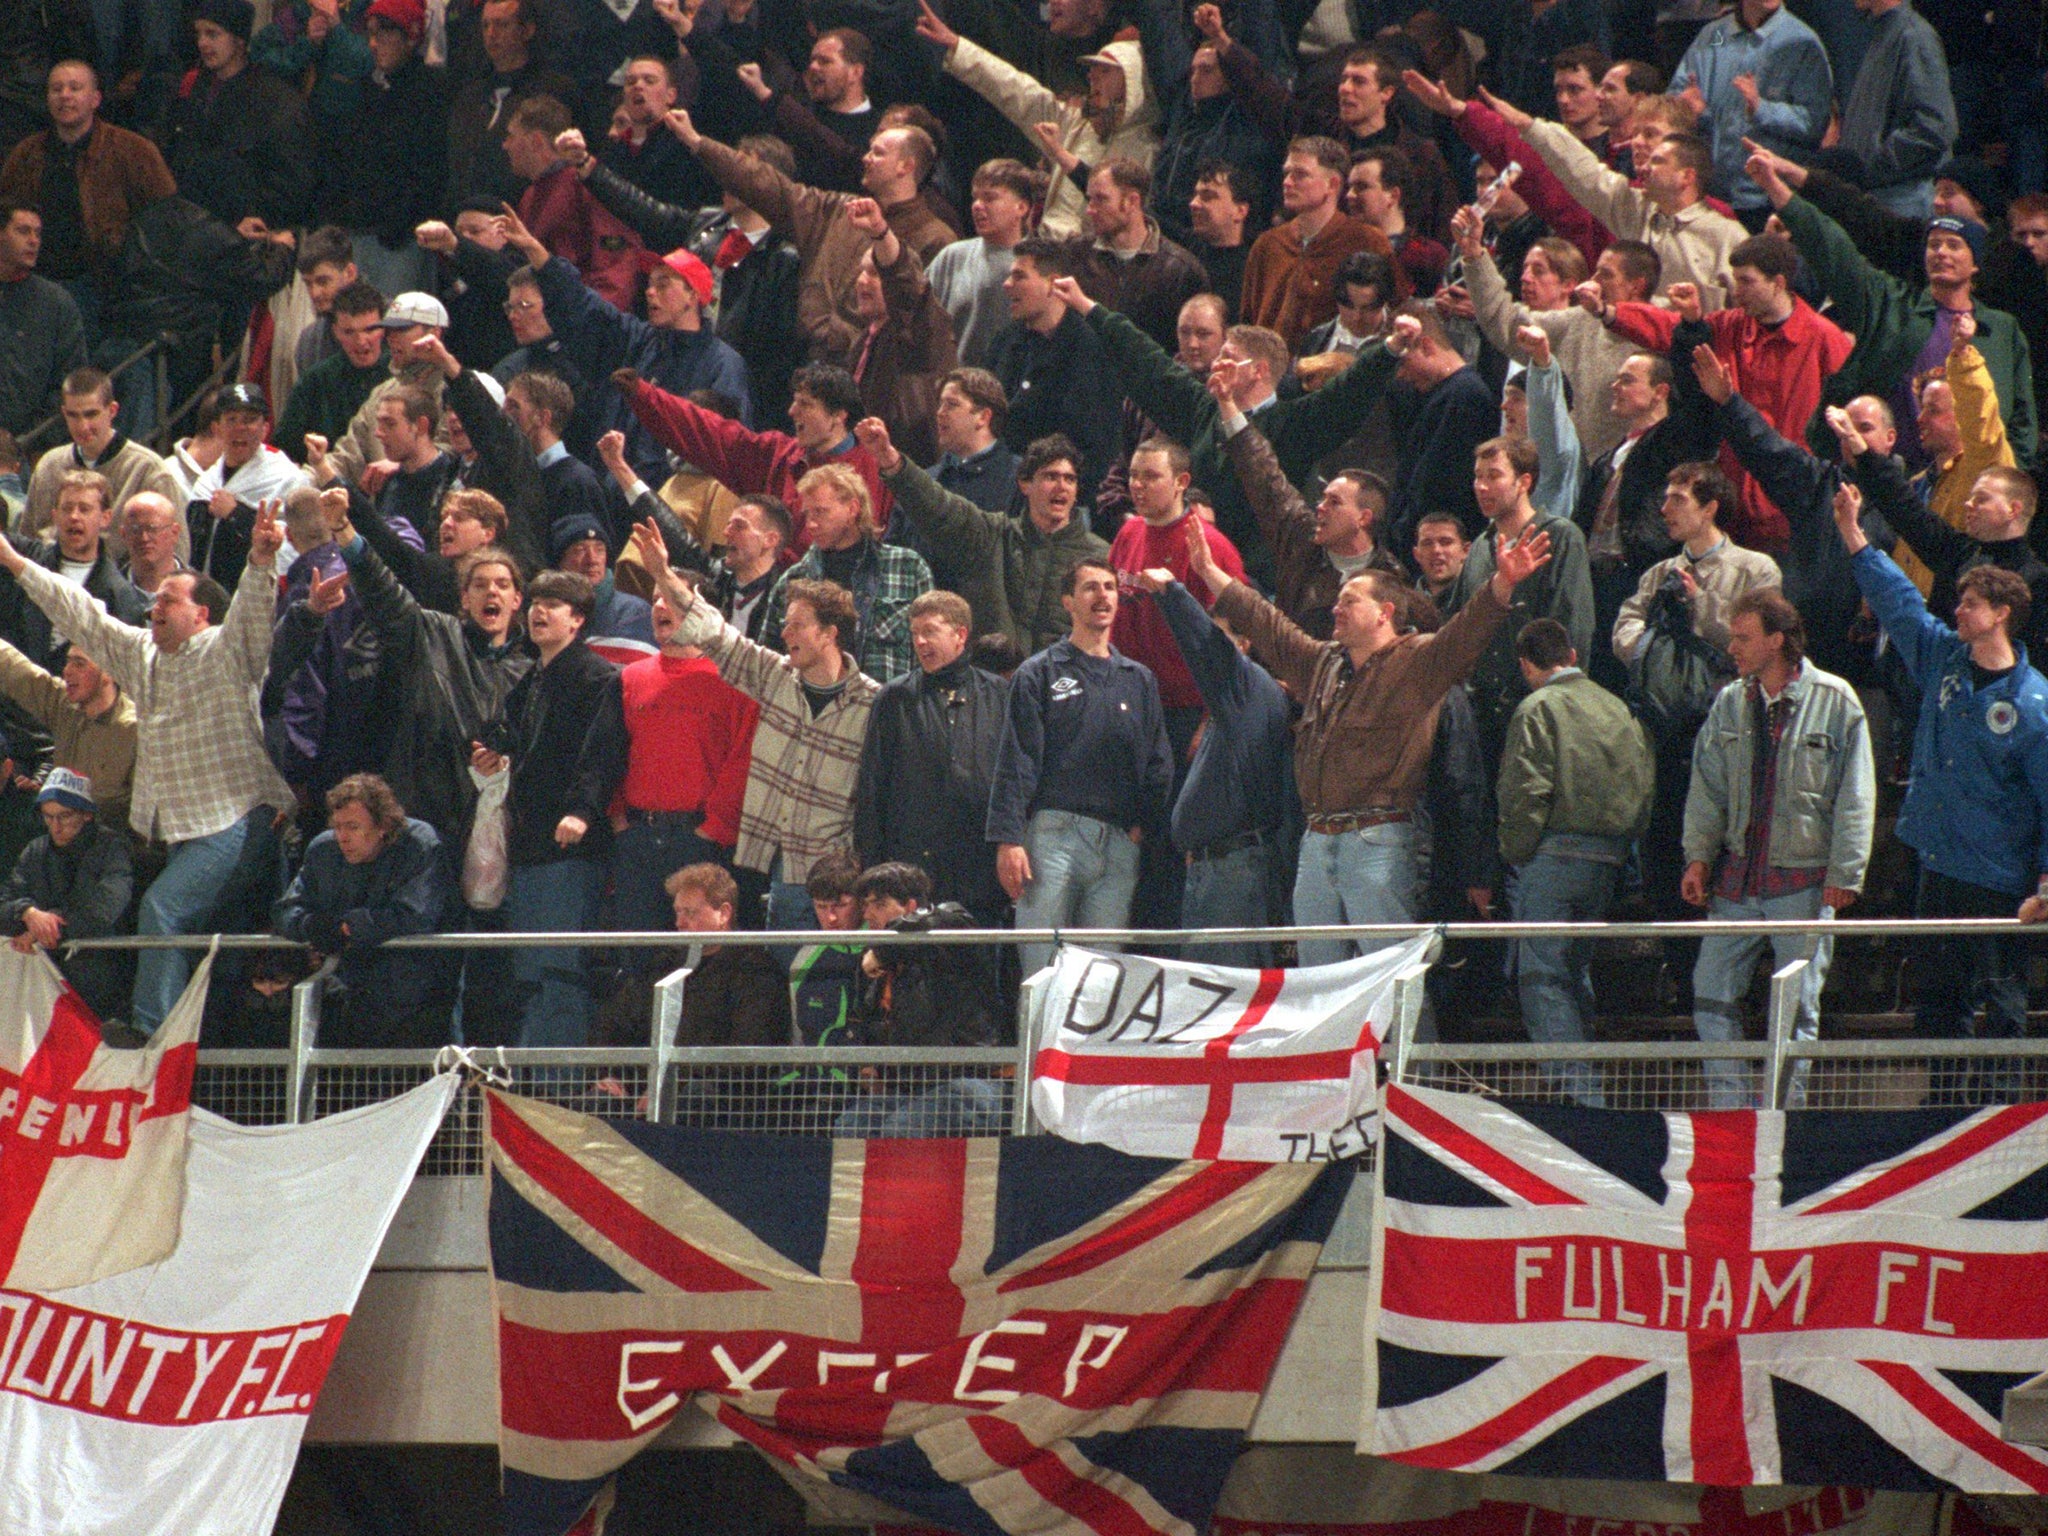 The last game between the Republic of Ireland and England in 1995 was abandoned amid rioting instigated by far-right organisation Combat 18